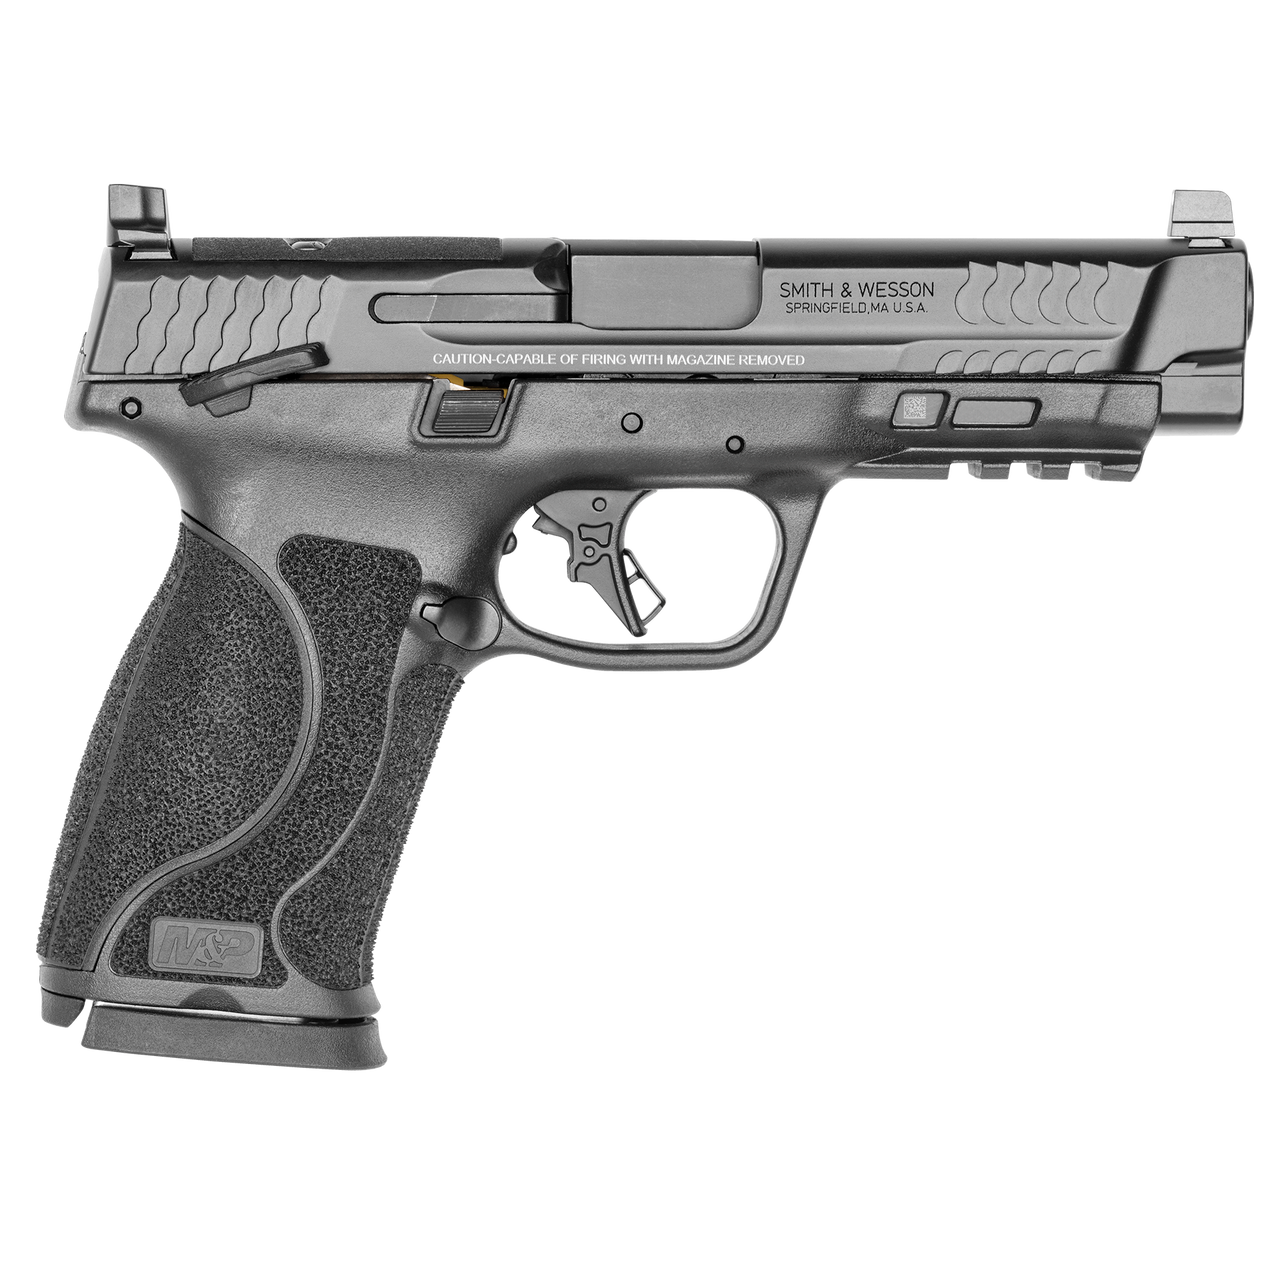 Smith and Wesson M&P 10mm 4.6in Barrel 15+1 Round Capacity